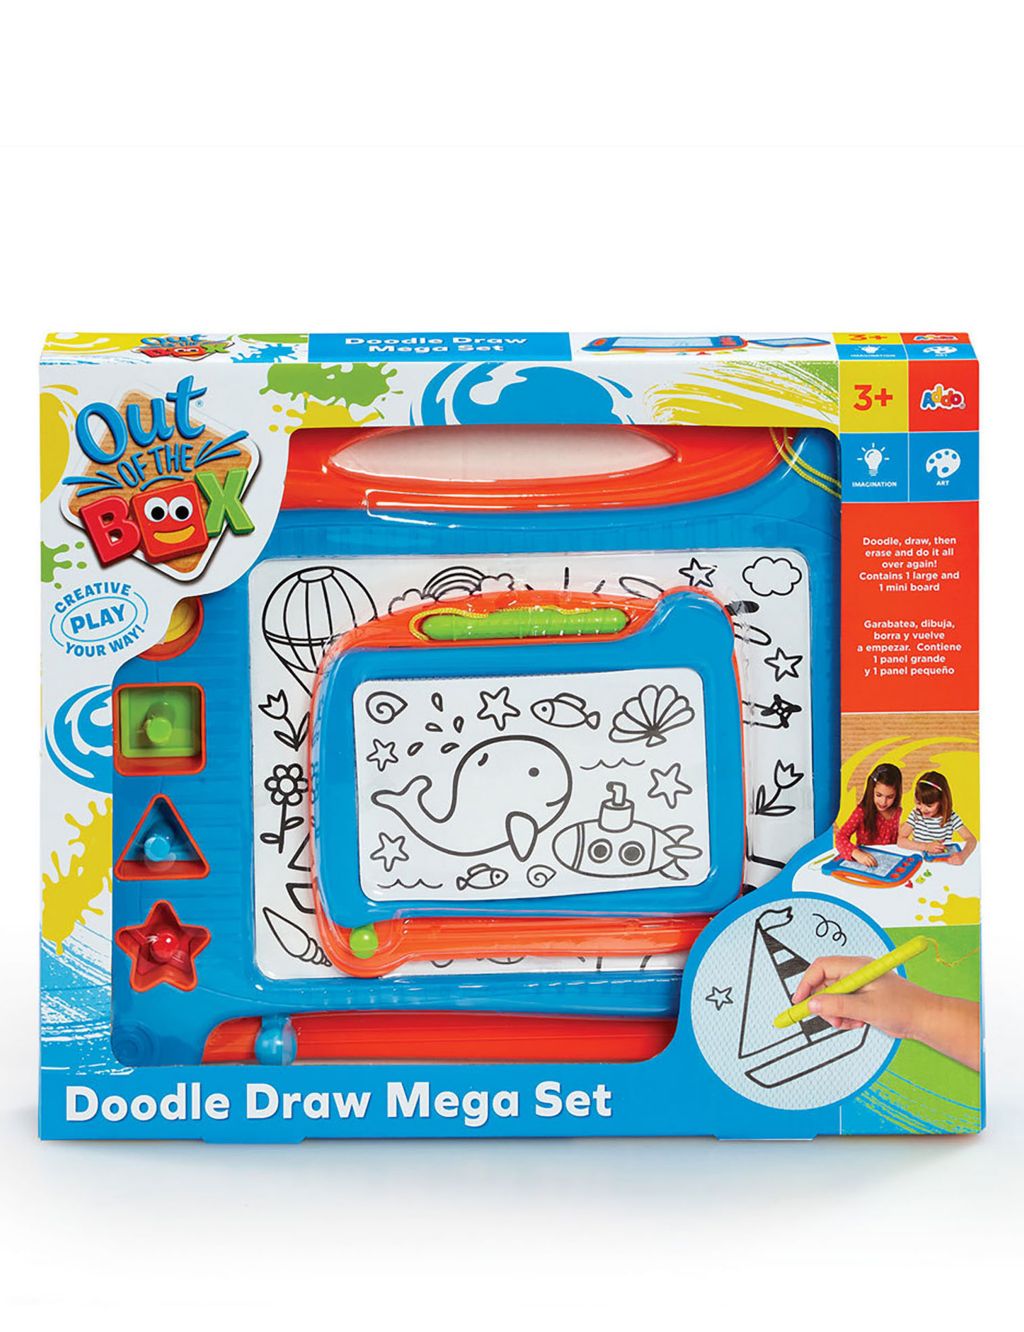 Out of the Box Doodle Draw Mega Set (3+ Yrs)